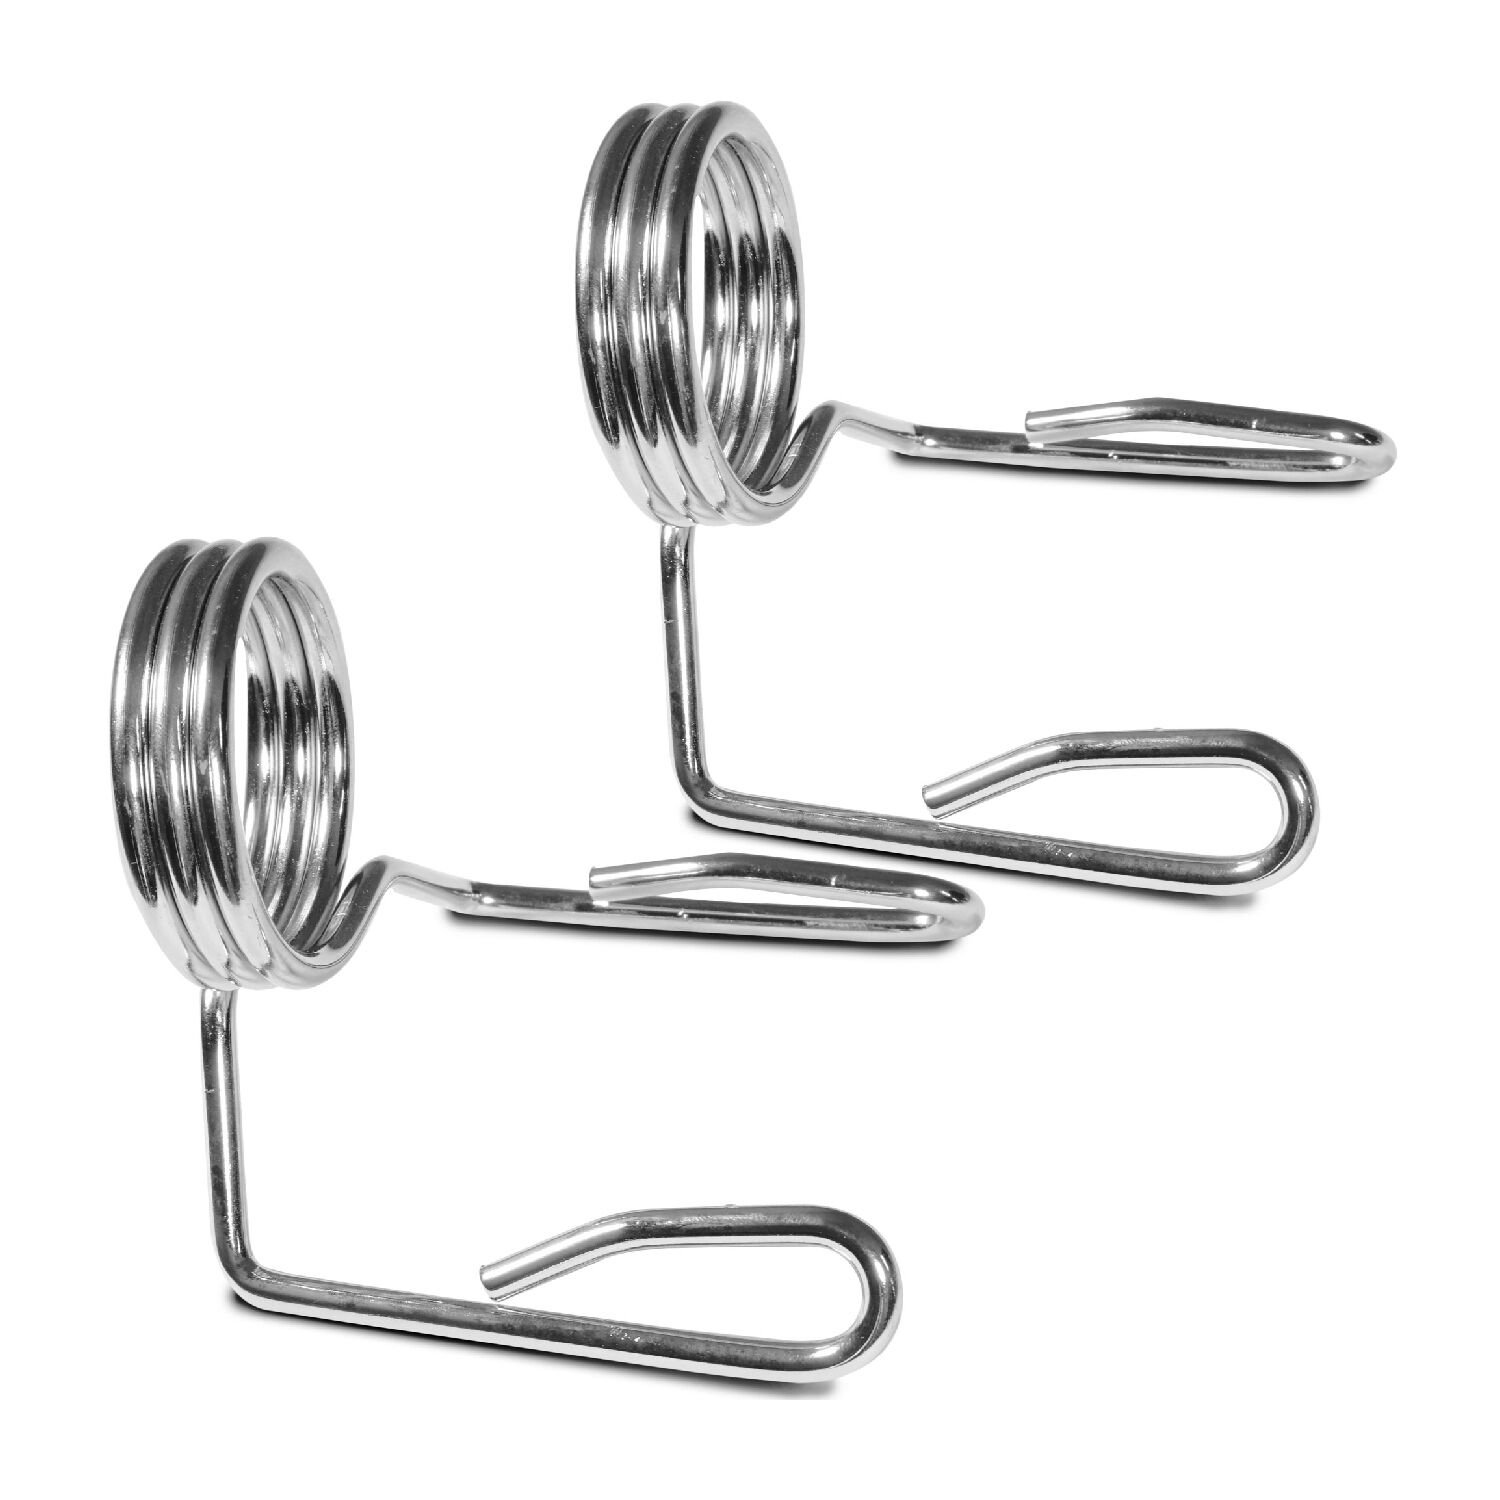 Olympic 2" 50mm Barbell Dumbbell Gym Weight Bar Clips Steel Spring Collars Pair 